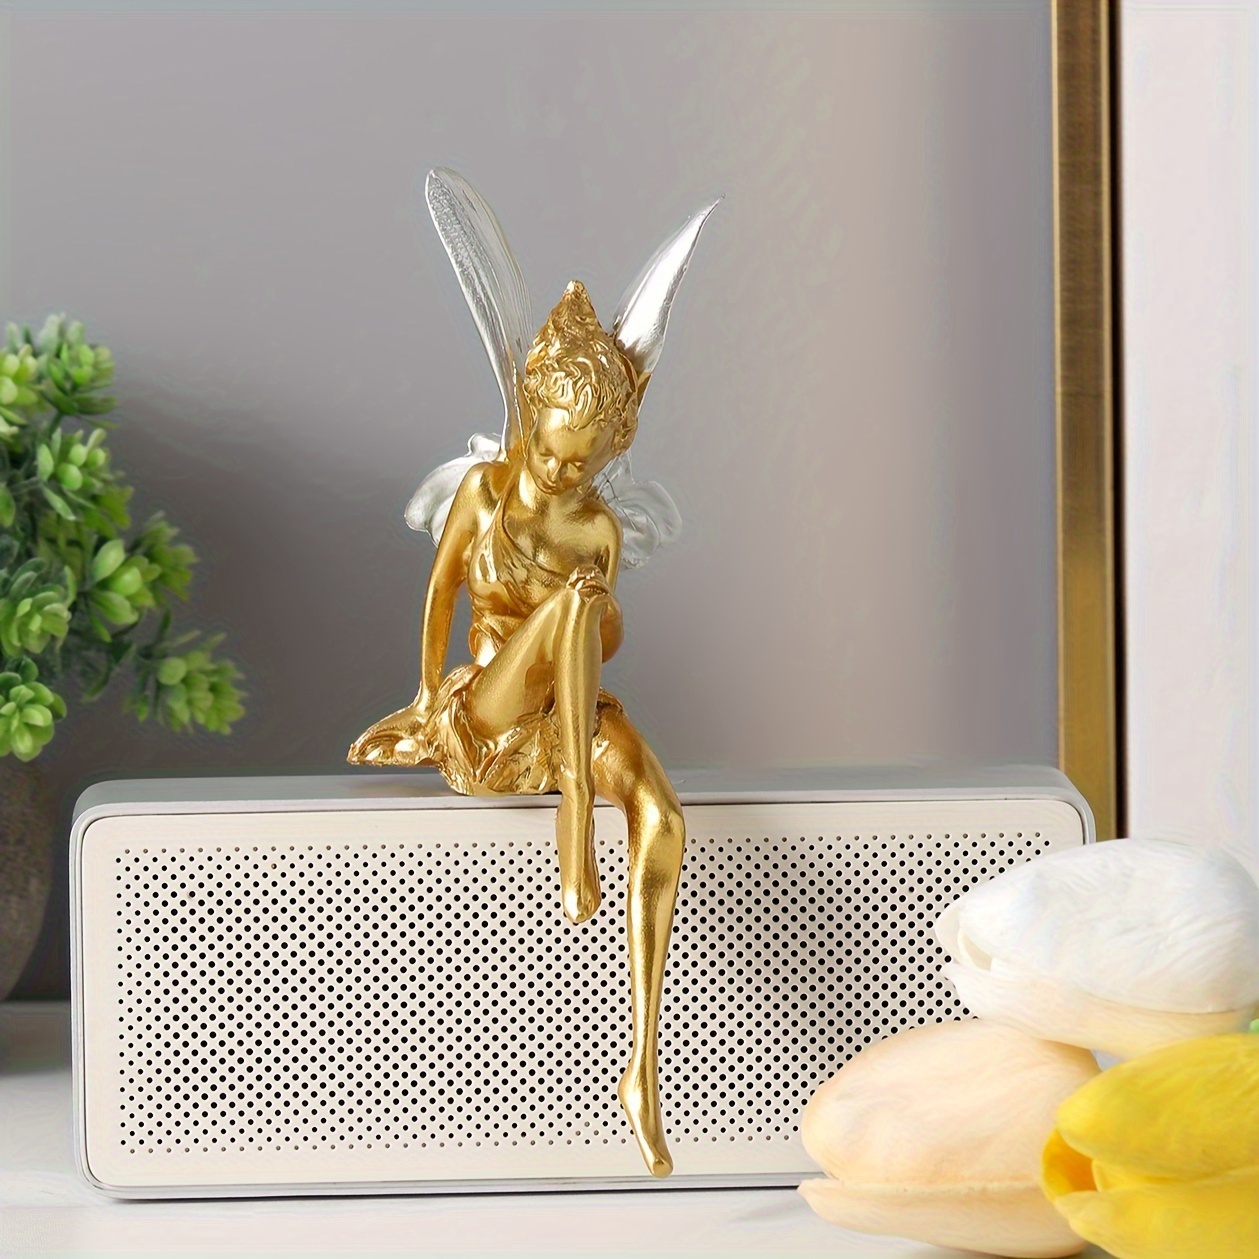 

1pc Fairy Elf Ornament, Resin Statue Art Craft, For Bookshelf Home Living Room Office Cabinet Decor, Room Tabletop Entryway Decor, Valentine New Year Easter Party Decor